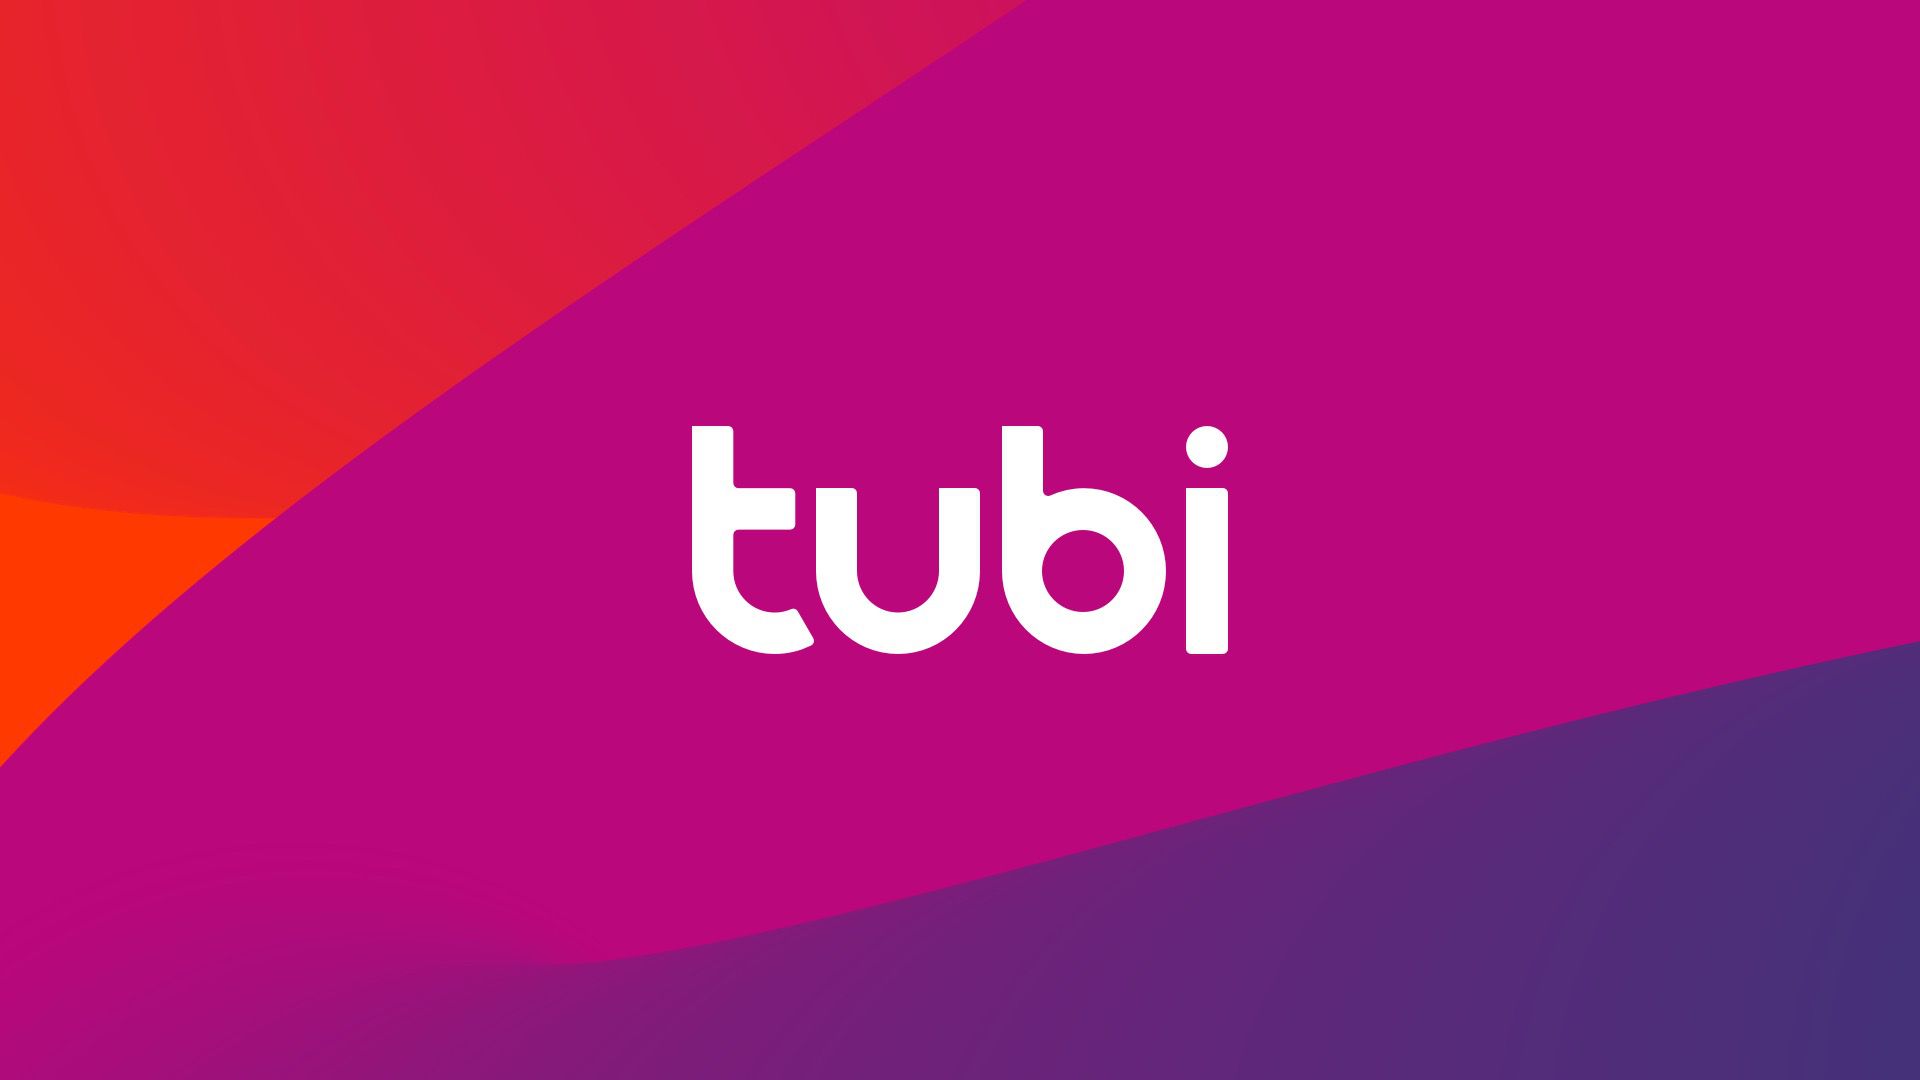 Fox Corporation Buys Ad Supported Tubi Streaming Platform For $440 Million